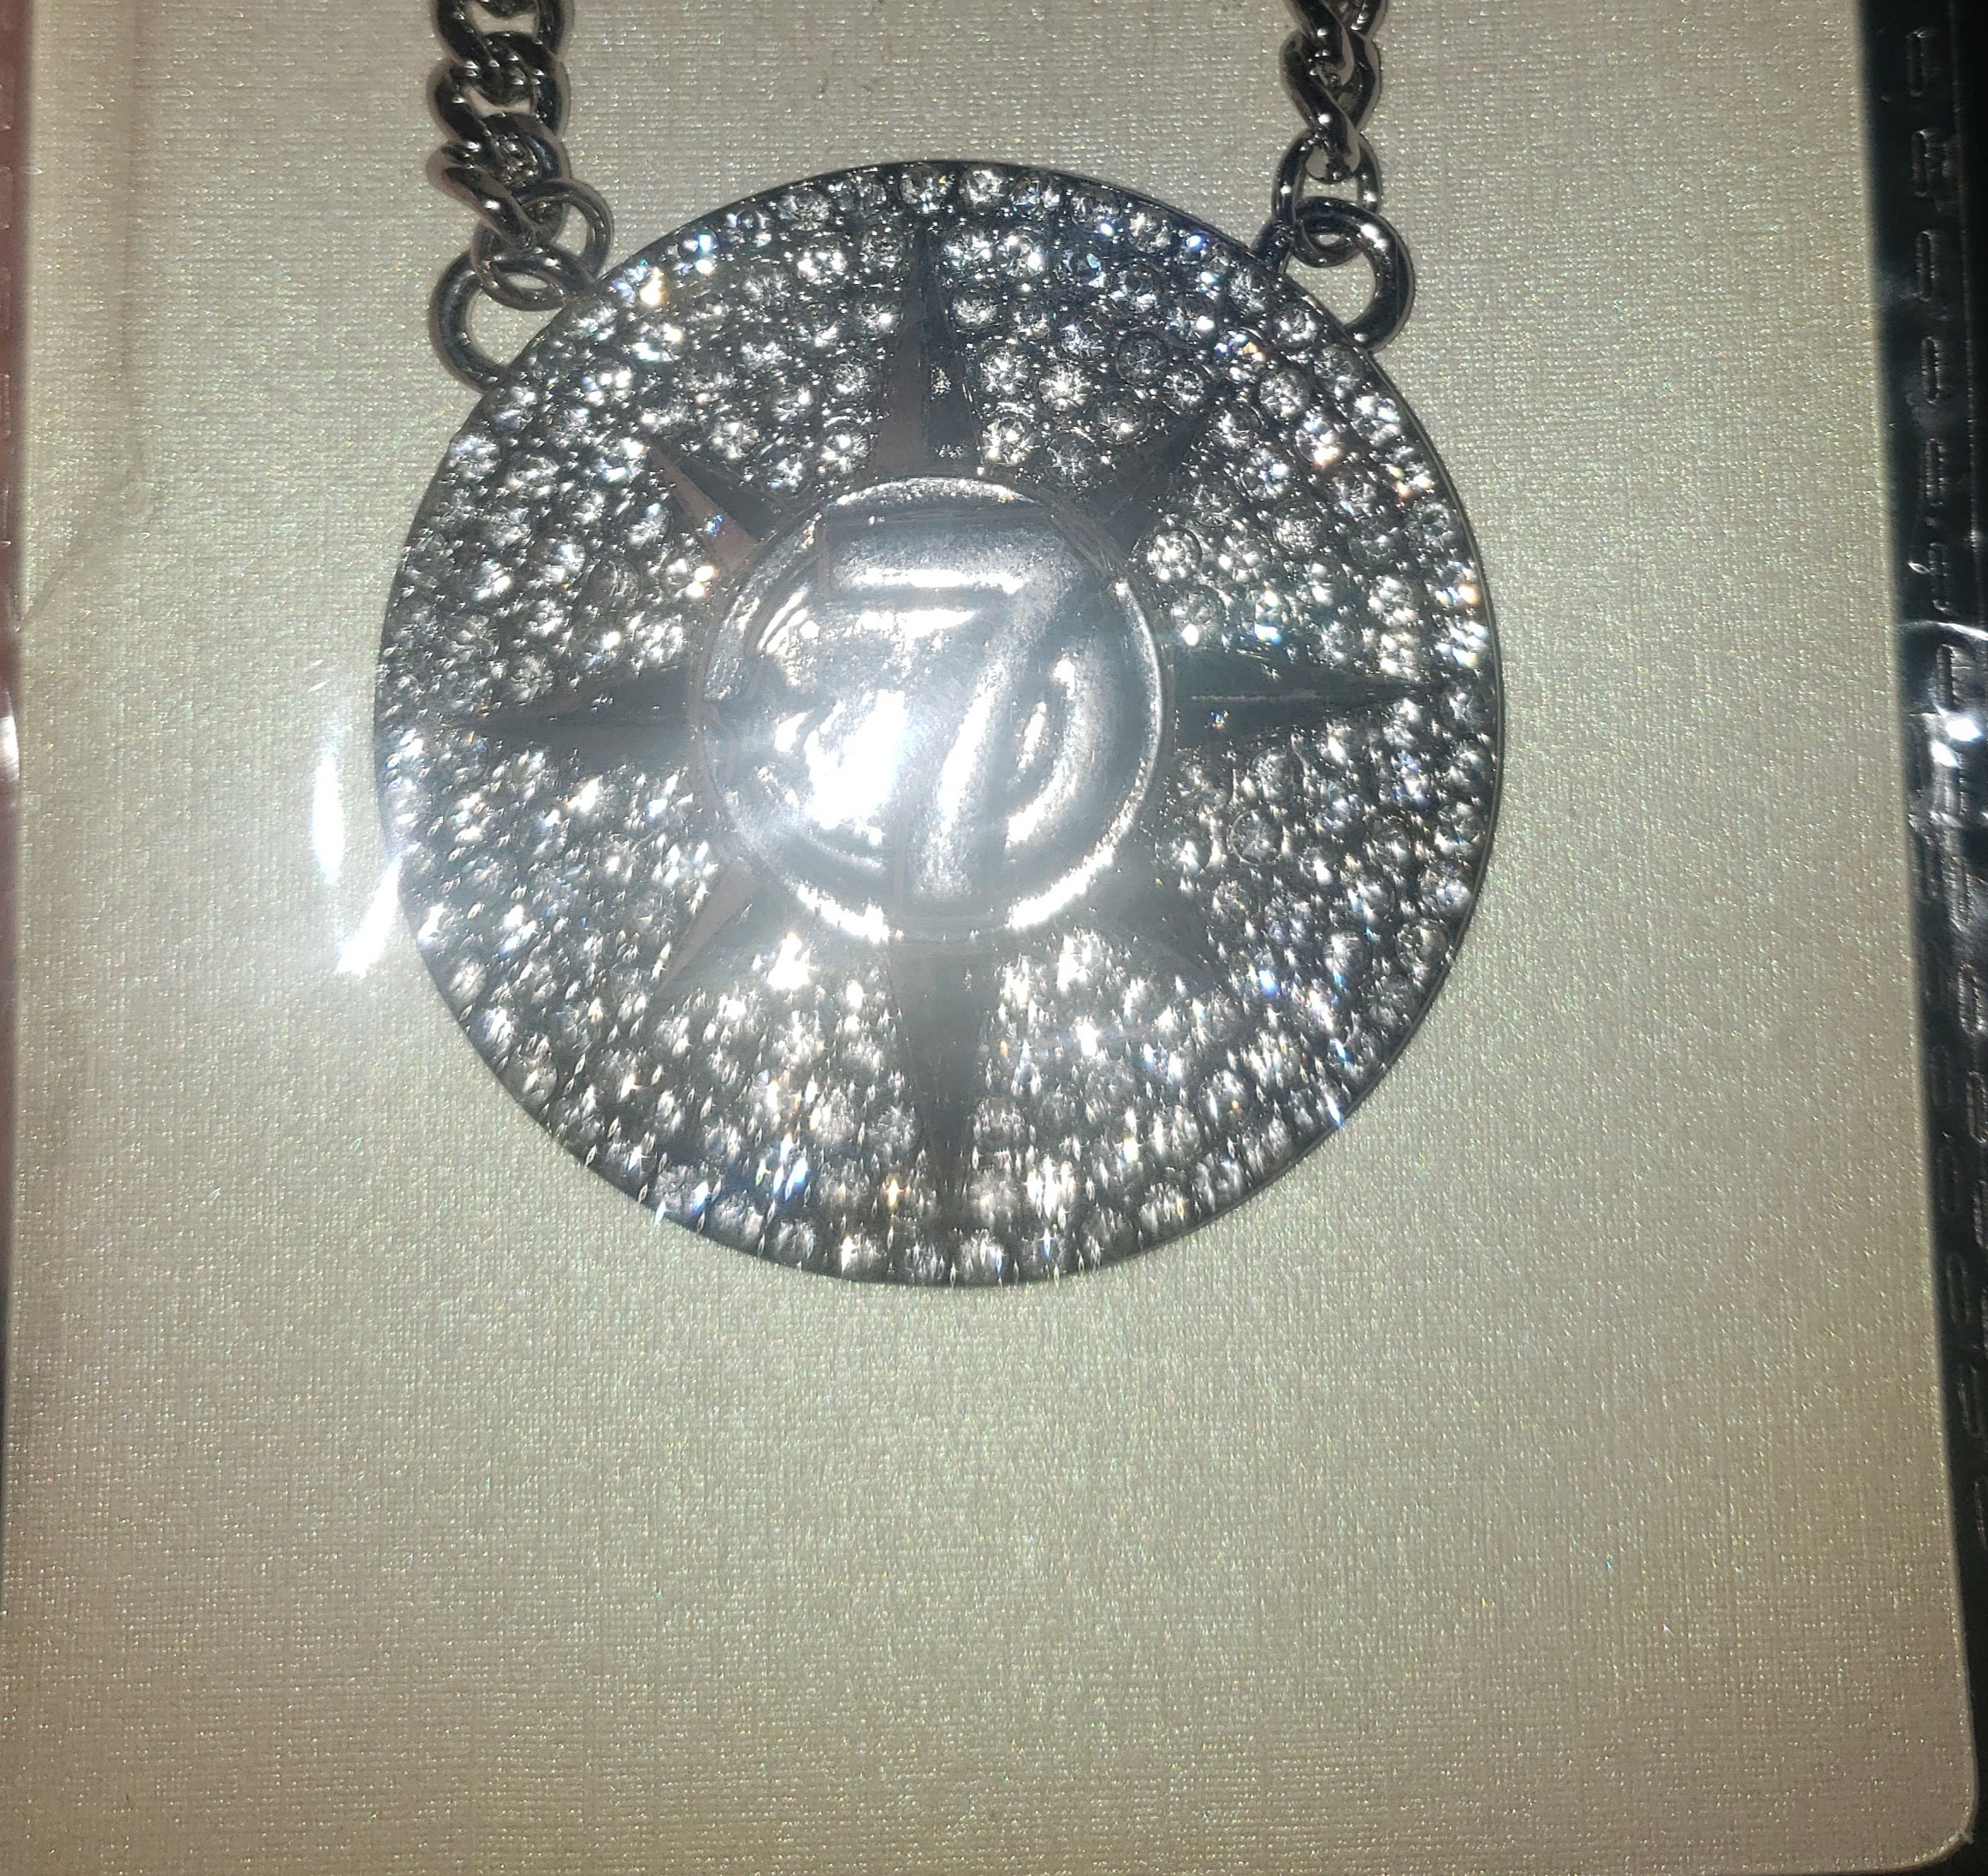 24" Chain and 7 Percenter medallion (jewelry)